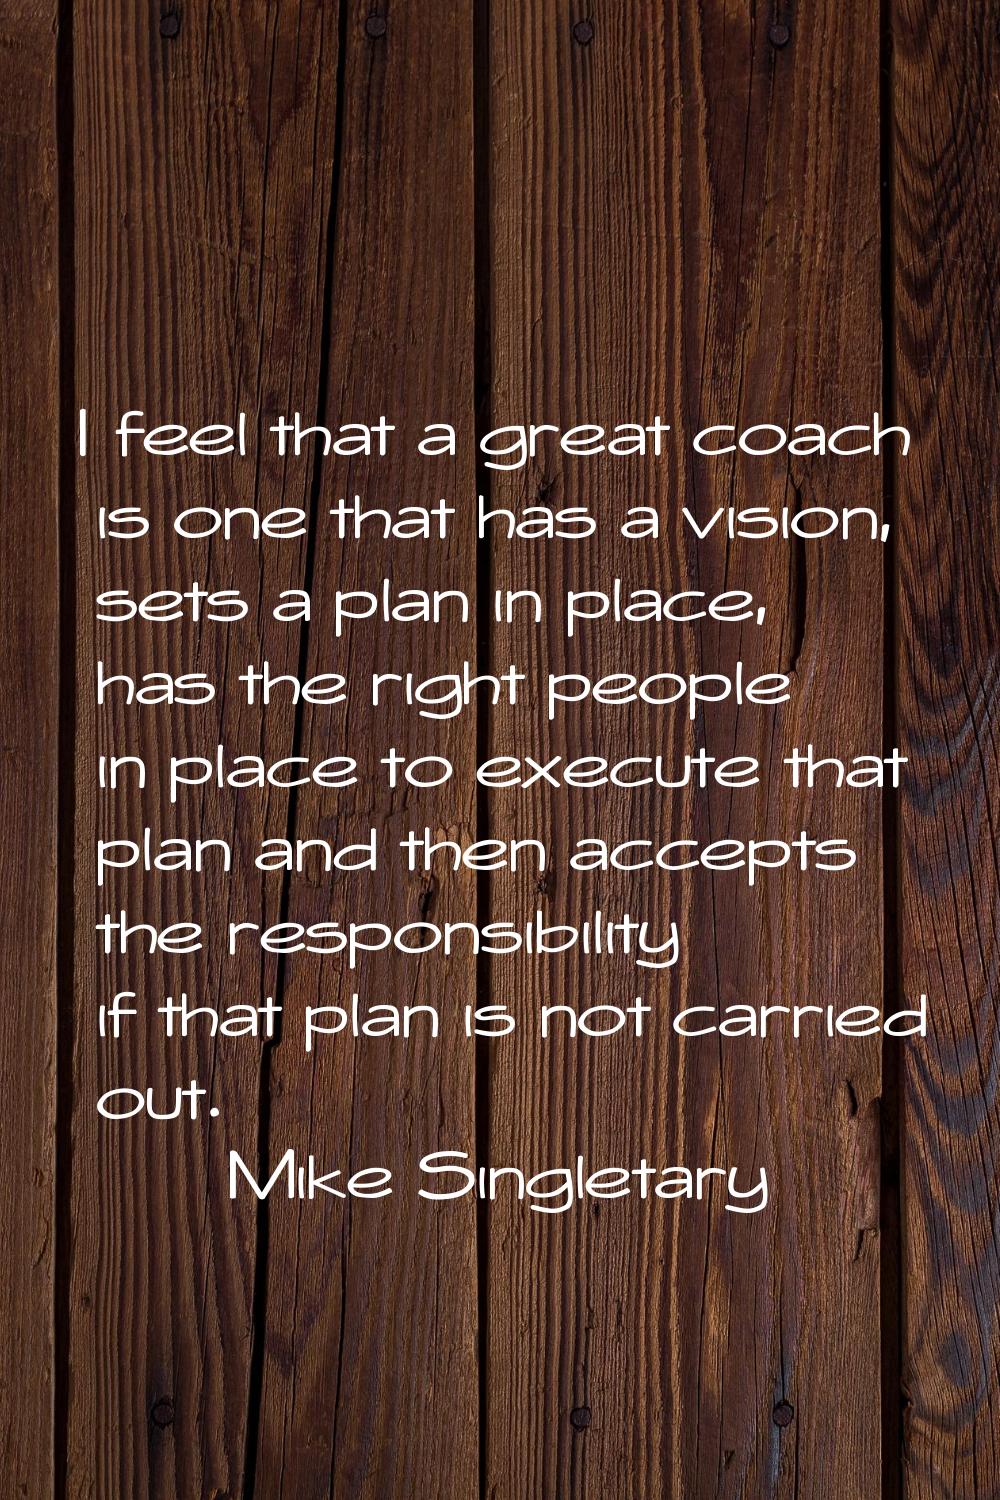 I feel that a great coach is one that has a vision, sets a plan in place, has the right people in p